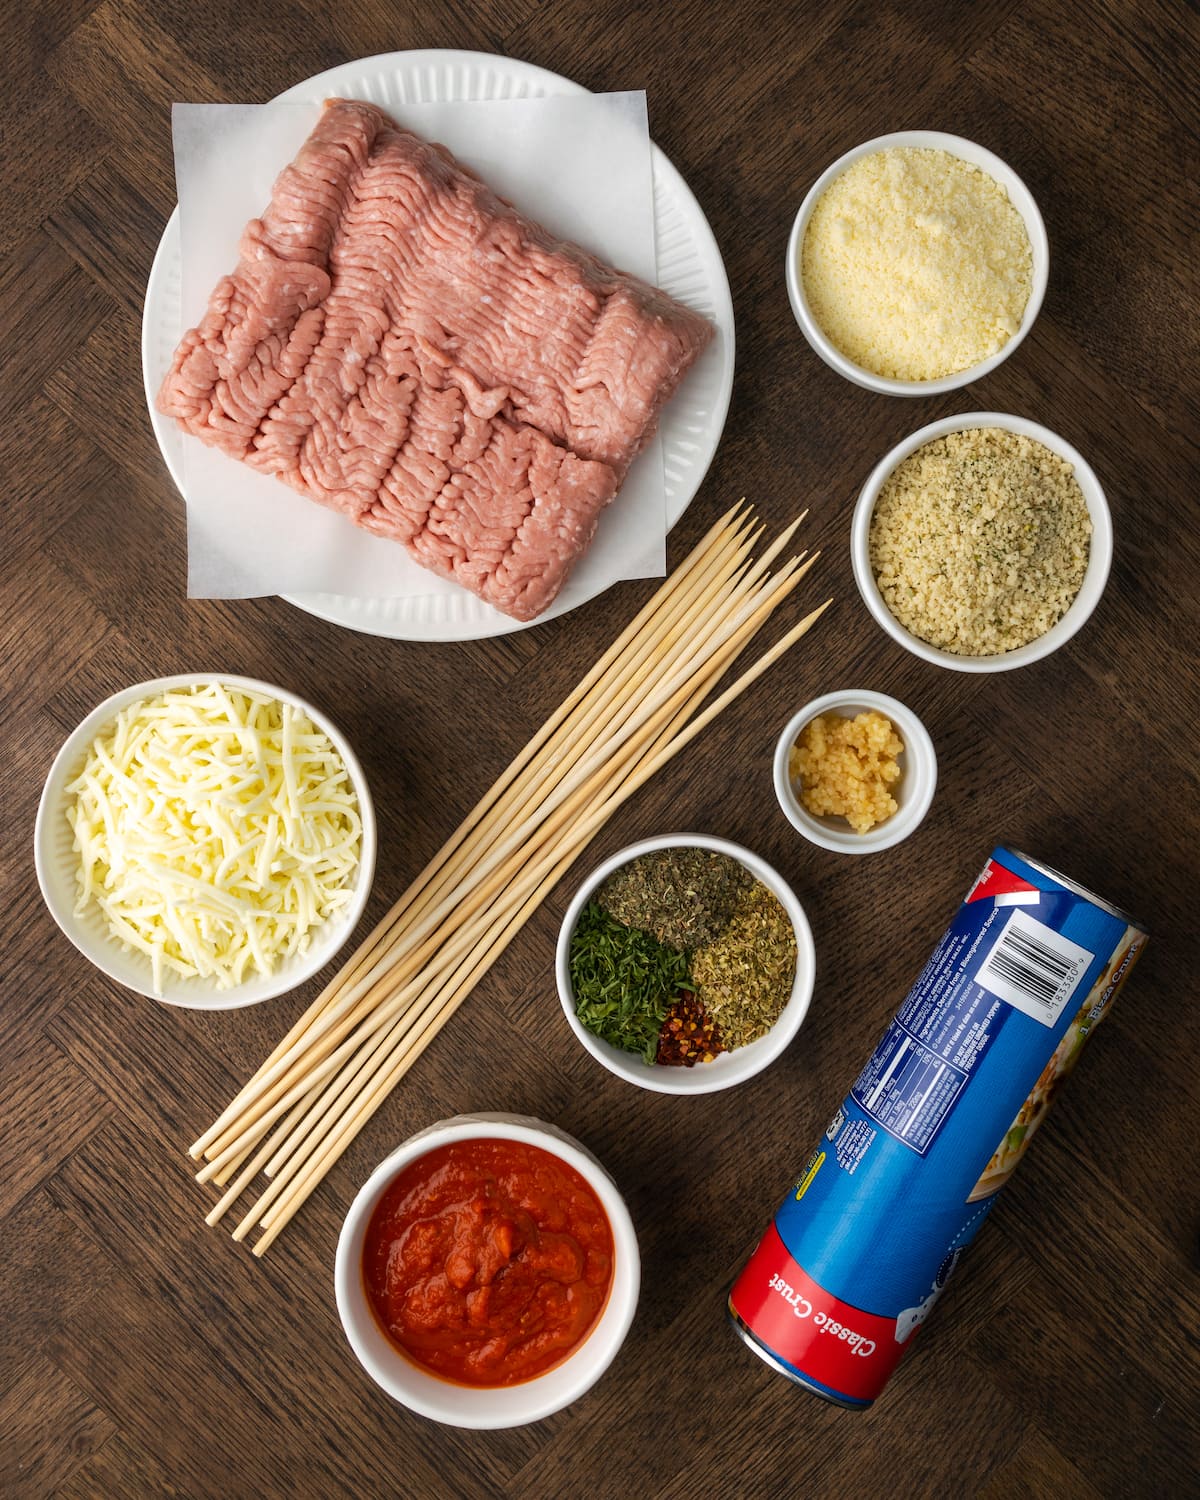 The ingredients for meatball subs on a stick.